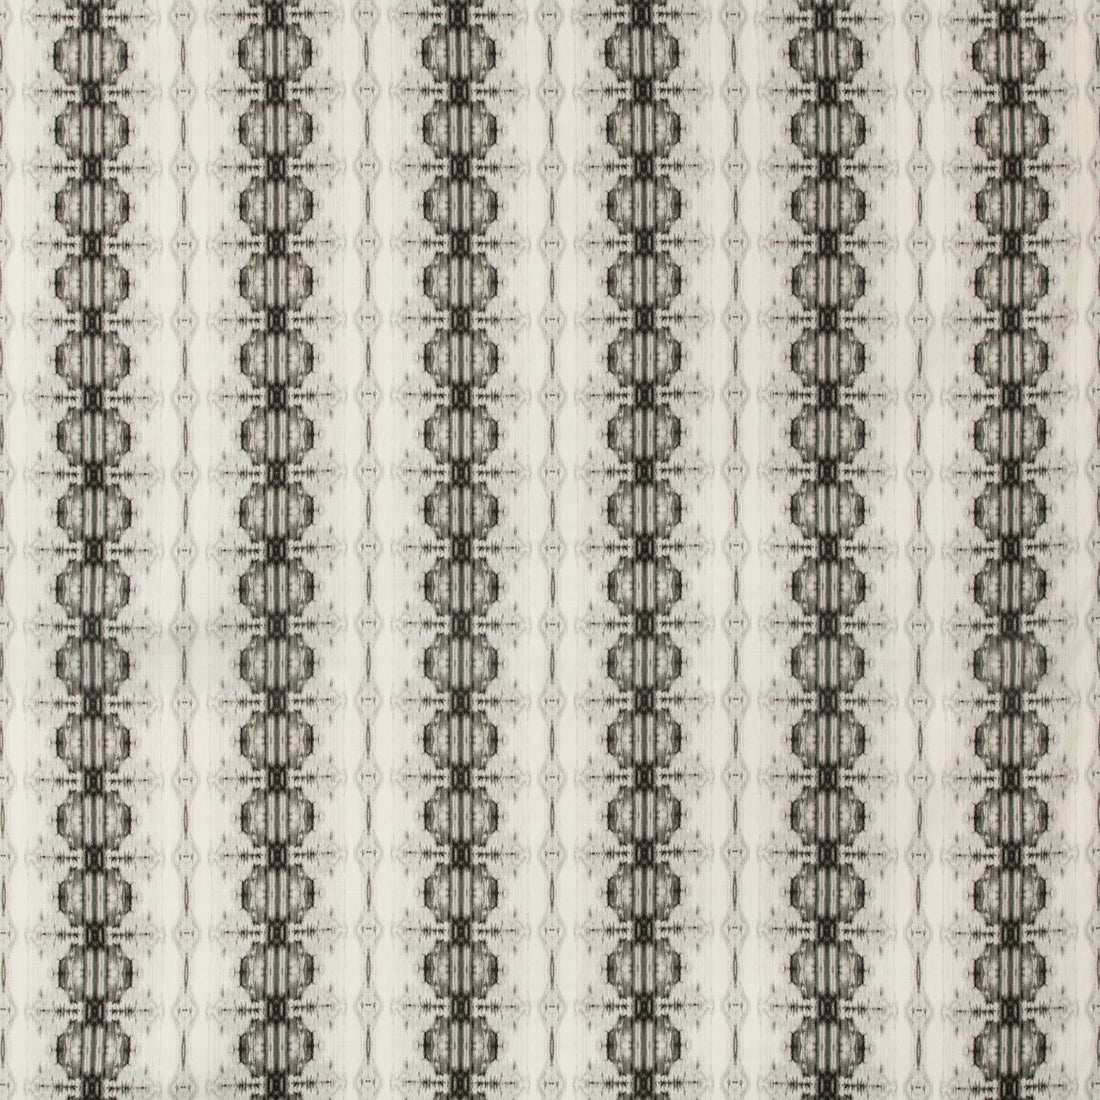 Goldie fabric in noir color - pattern GOLDIE.81.0 - by Kravet Design in the Barry Lantz Canvas To Cloth collection